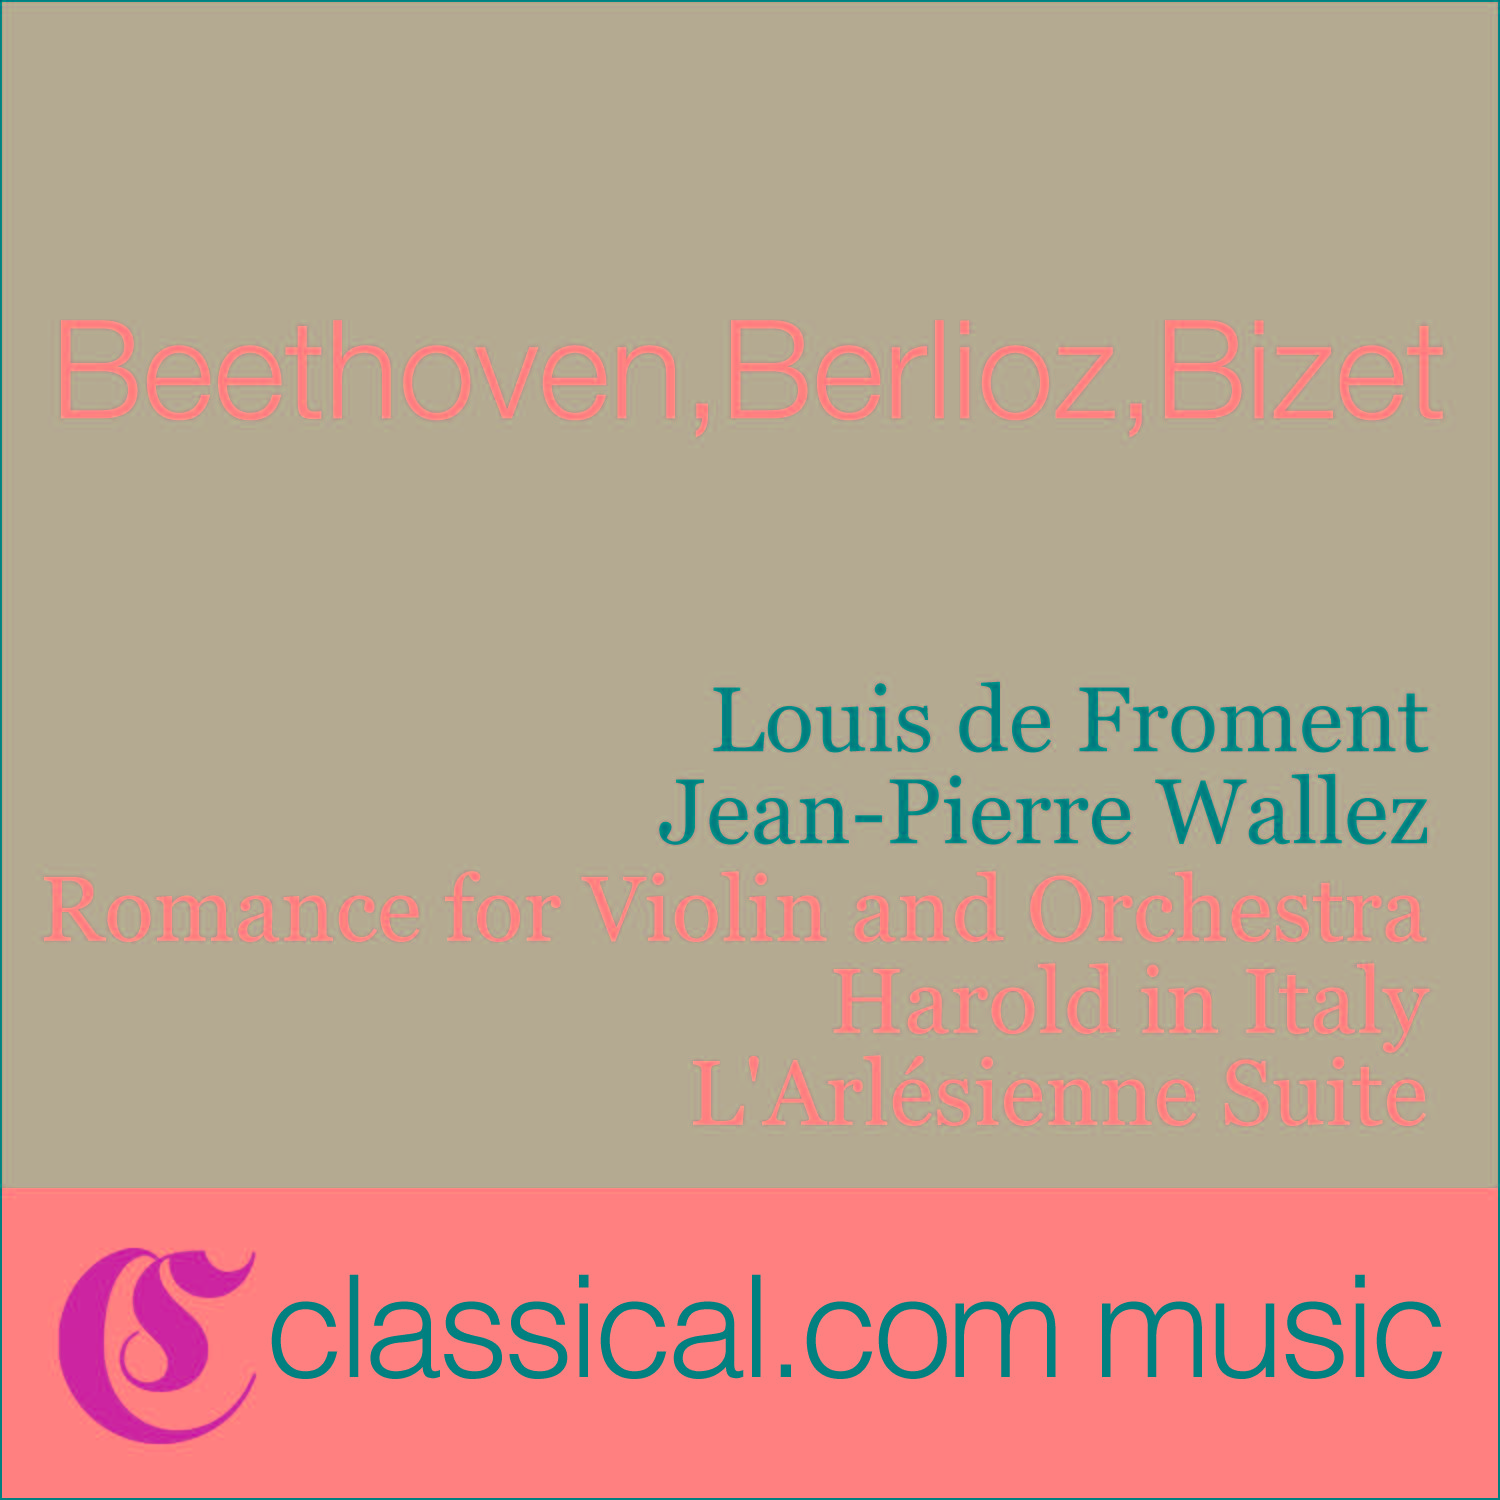 Ludwig van Beethoven, Romance For Violin And Orchestra No. 2 In F Major, Op. 50